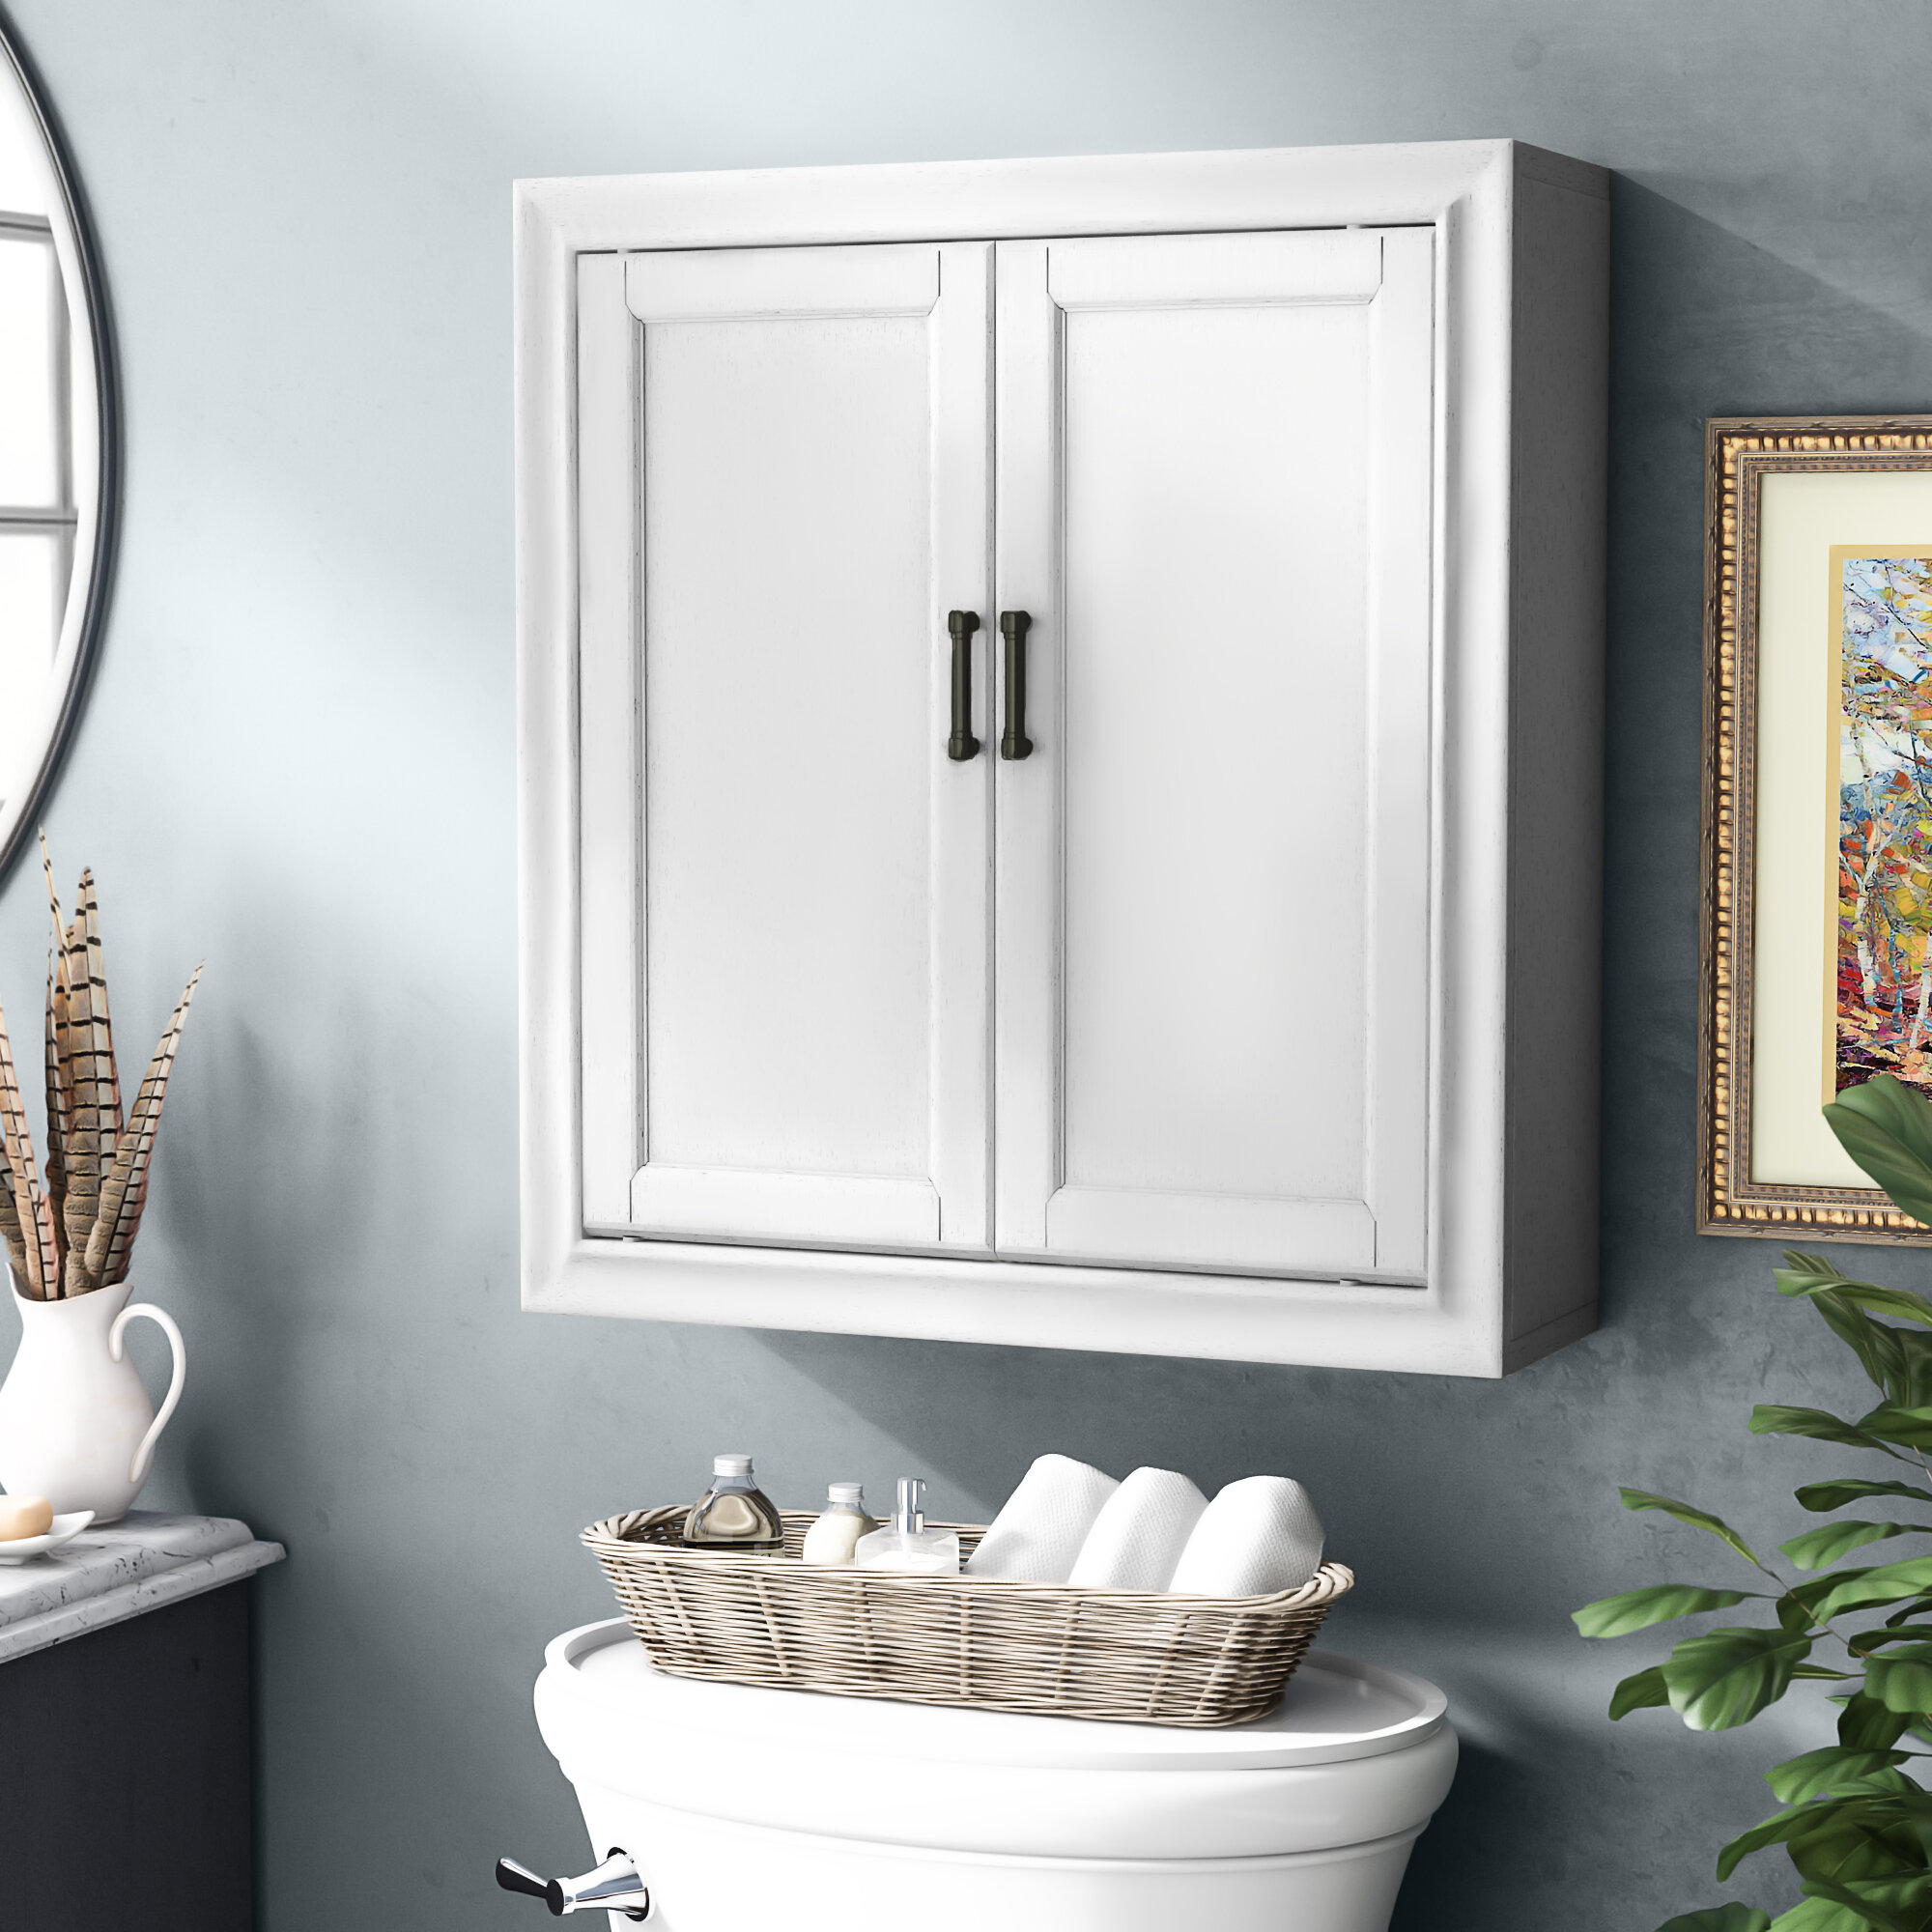 Andover Mills Jesse 23 75 W X 26 H X 8 D Wall Mounted Bathroom